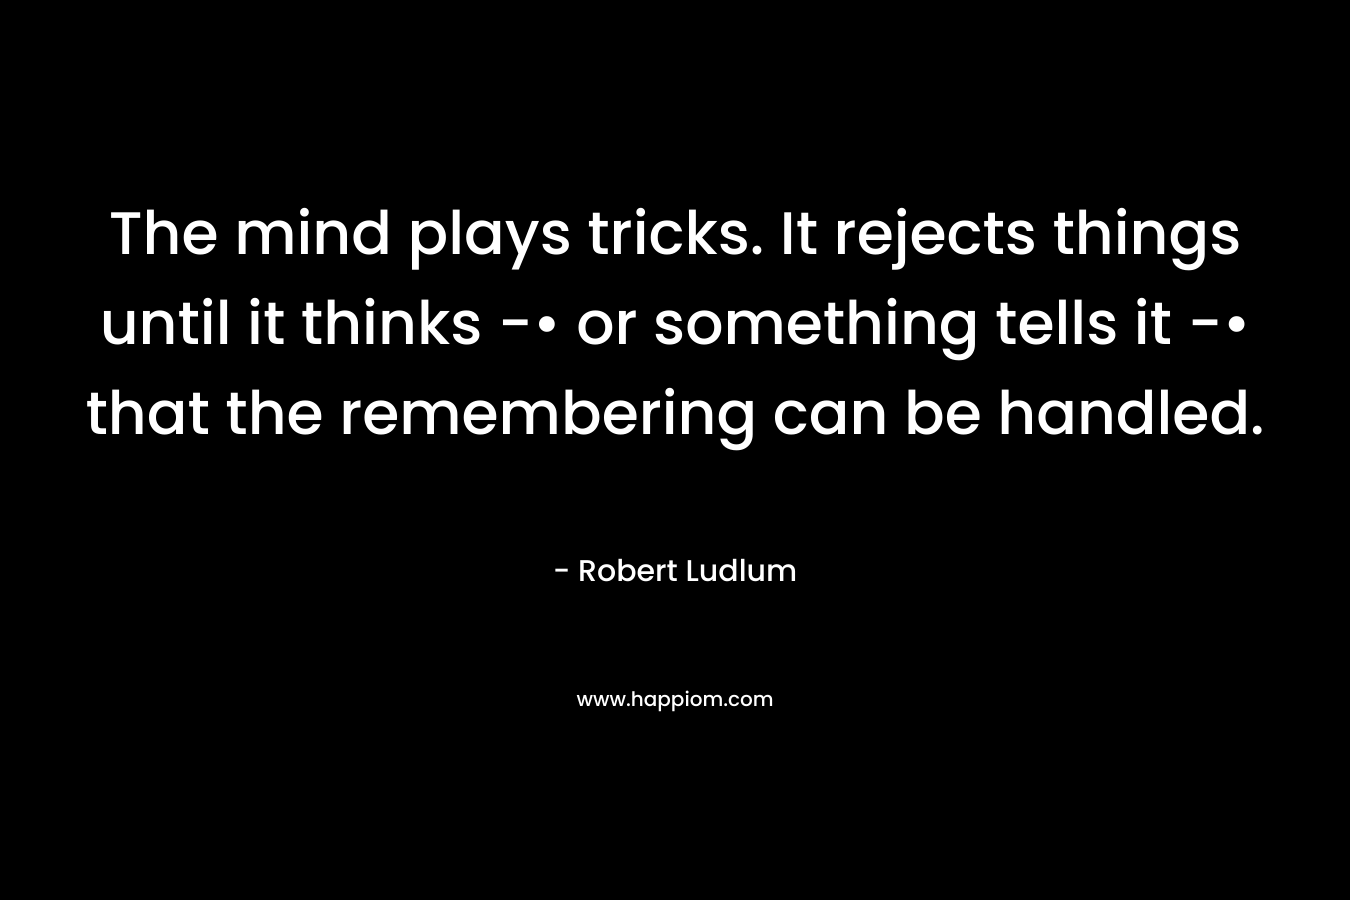 The mind plays tricks. It rejects things until it thinks -• or something tells it -• that the remembering can be handled.